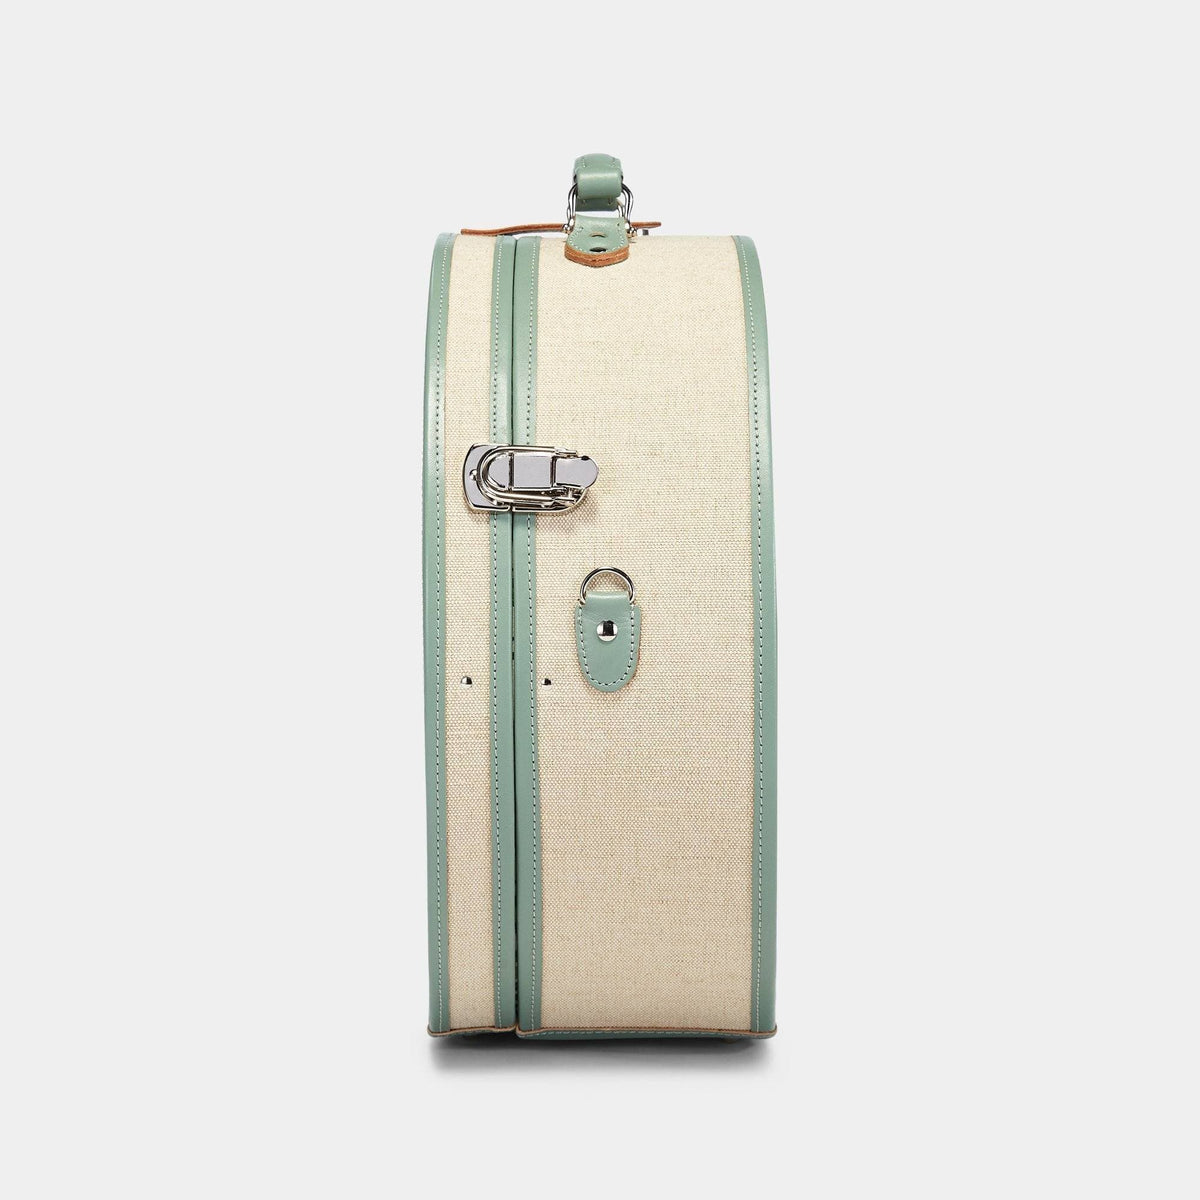 The Editor - Sea Green Hatbox Deluxe Hatbox Deluxe Steamline Luggage 